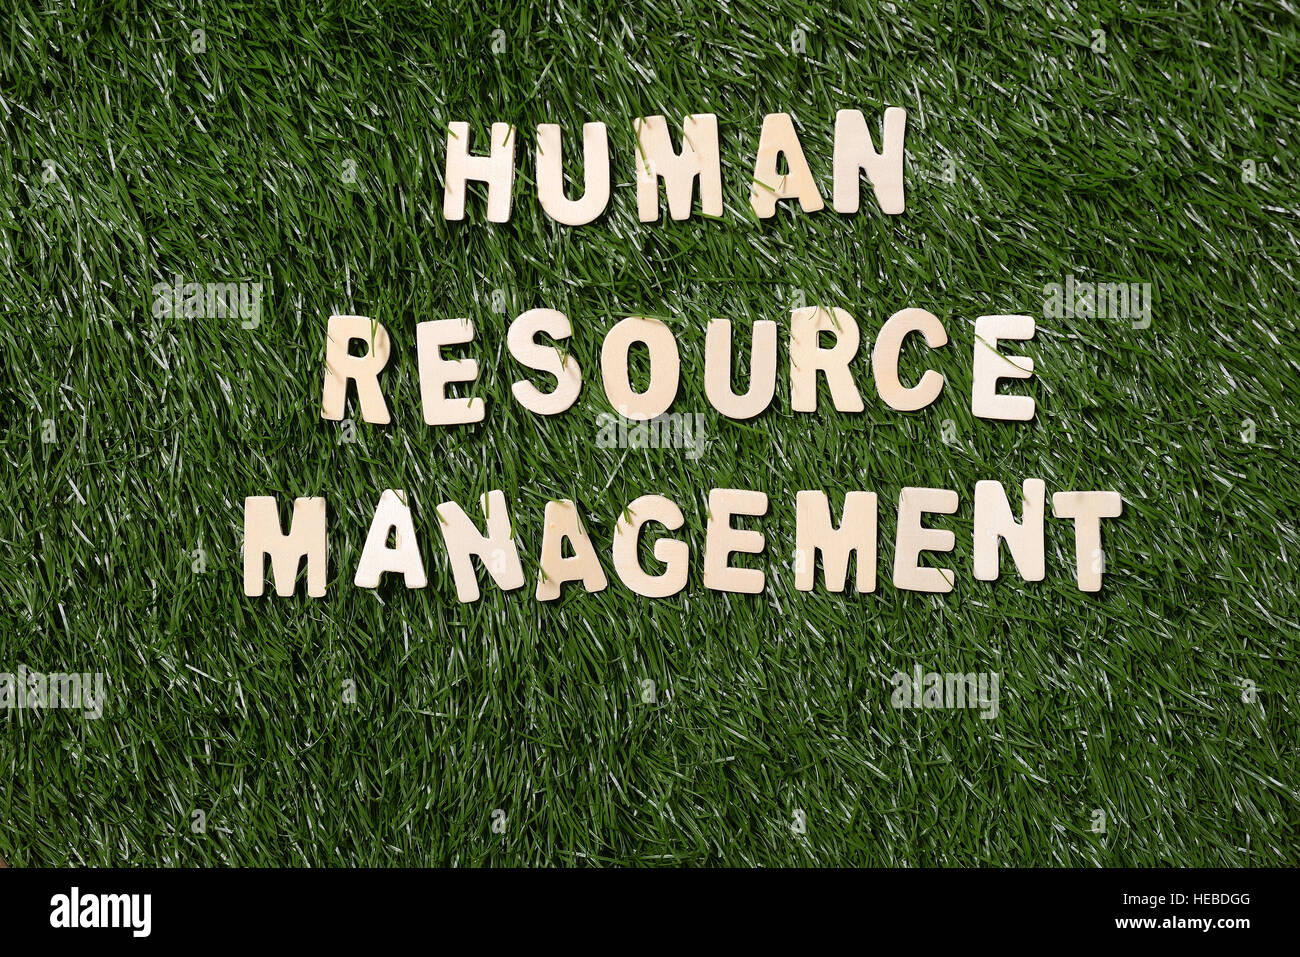 Human resource management wooden sign  on green grass background Stock Photo